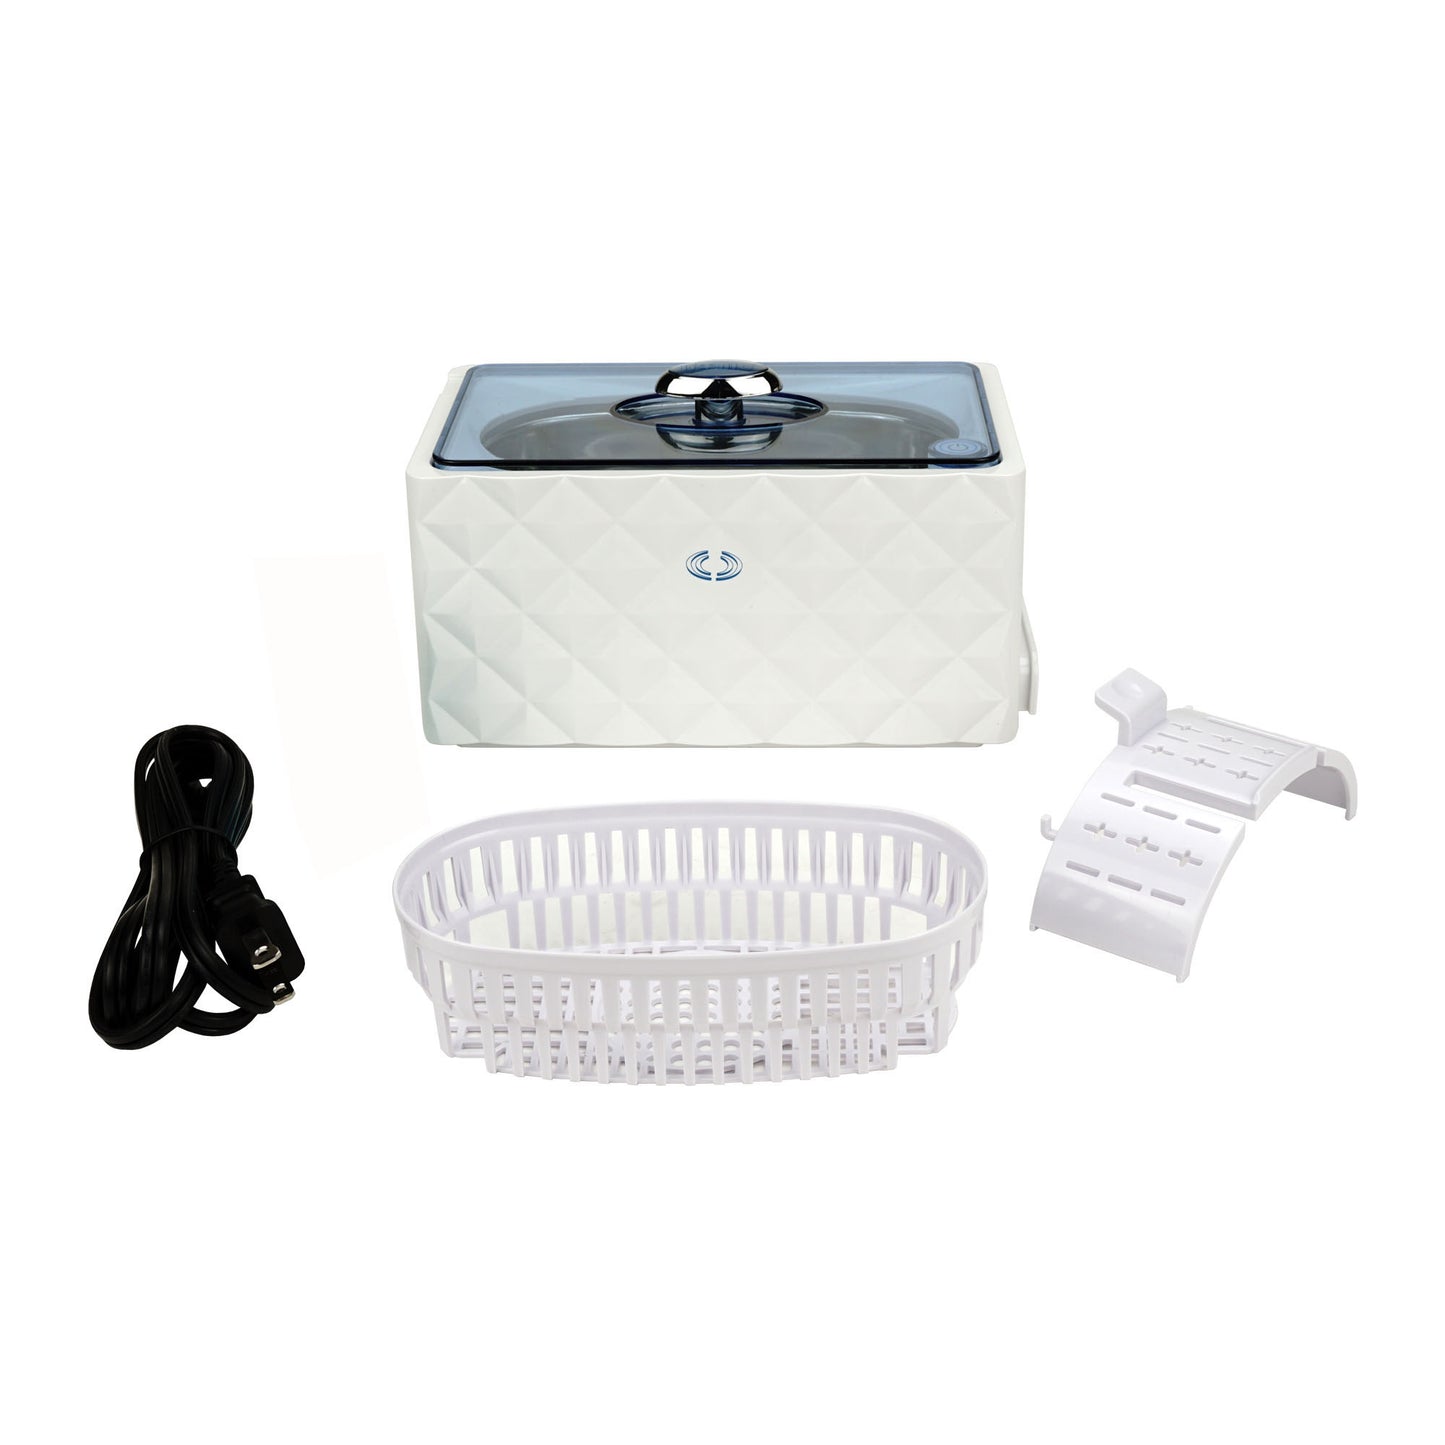 D3000+CSGJ01 | iSonic® Ultrasonic Cleaner, 0.9Pt/0.45L, with Jewelry/Eyewear Cleaning Solution Concentrate CSGJ01, 8OZ, Promotional Price!